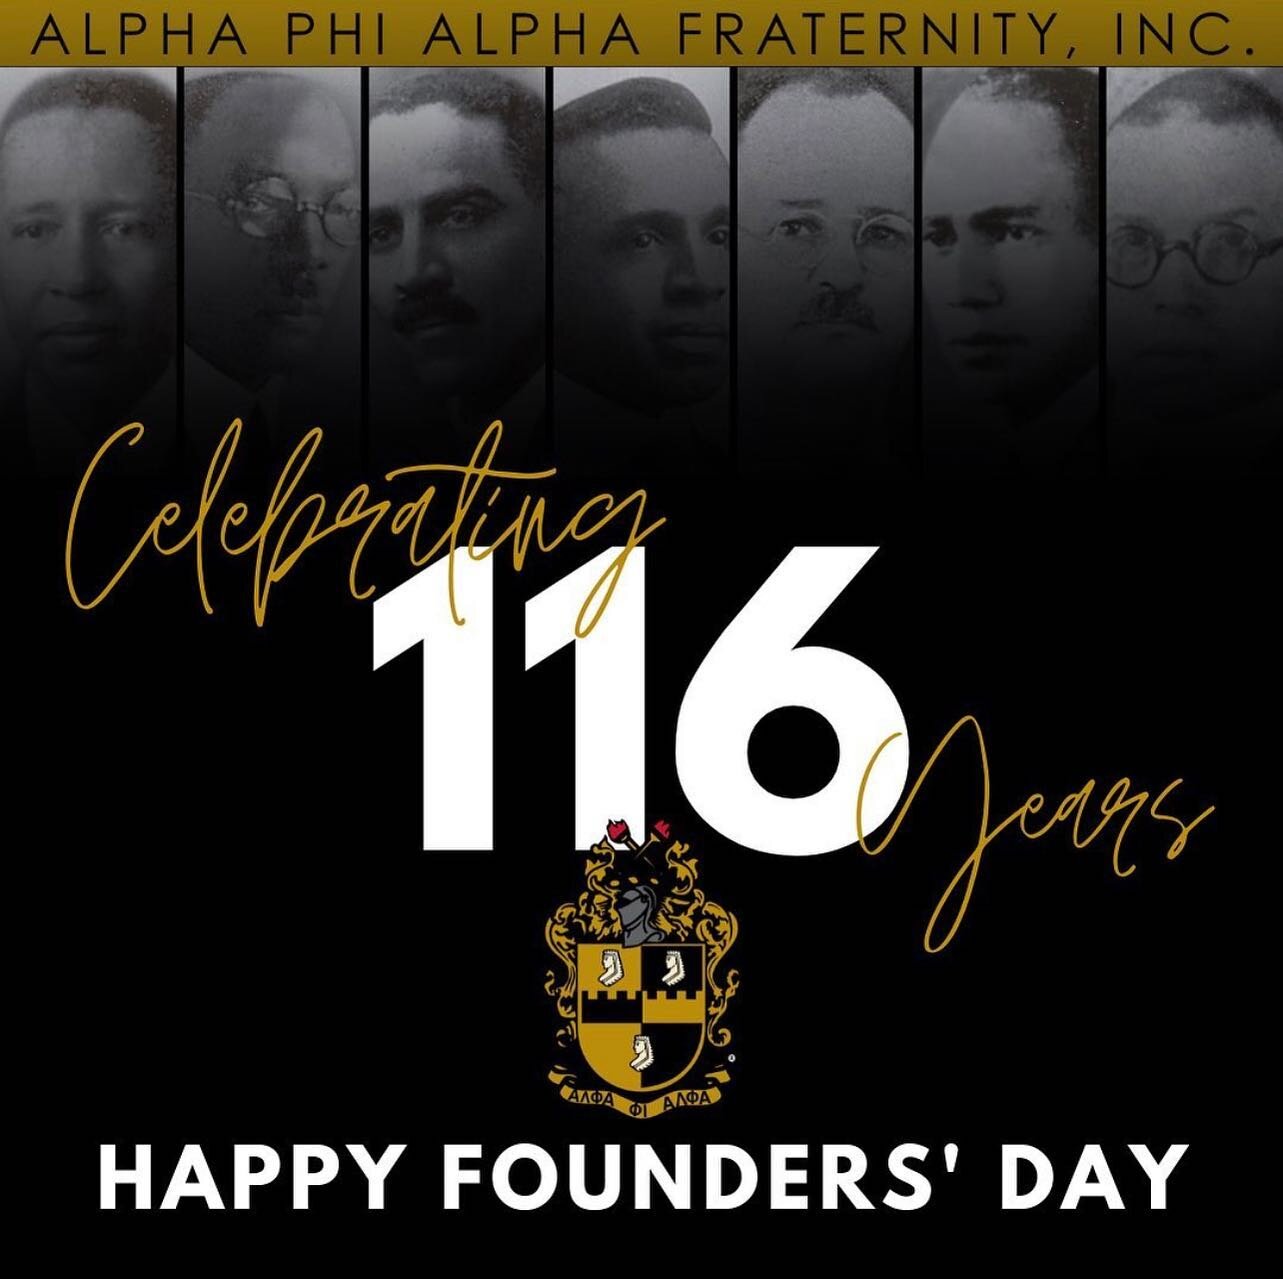 F I R S T // Happy Founders&rsquo; Day to our fellow brothers of Alpha Phi Alpha Fraternity, Inc. May we continue to serve our communities through manly deeds, scholarship and love for all mankind. 

#blackandgold #alphagammalambda #nyacoa #blackgree